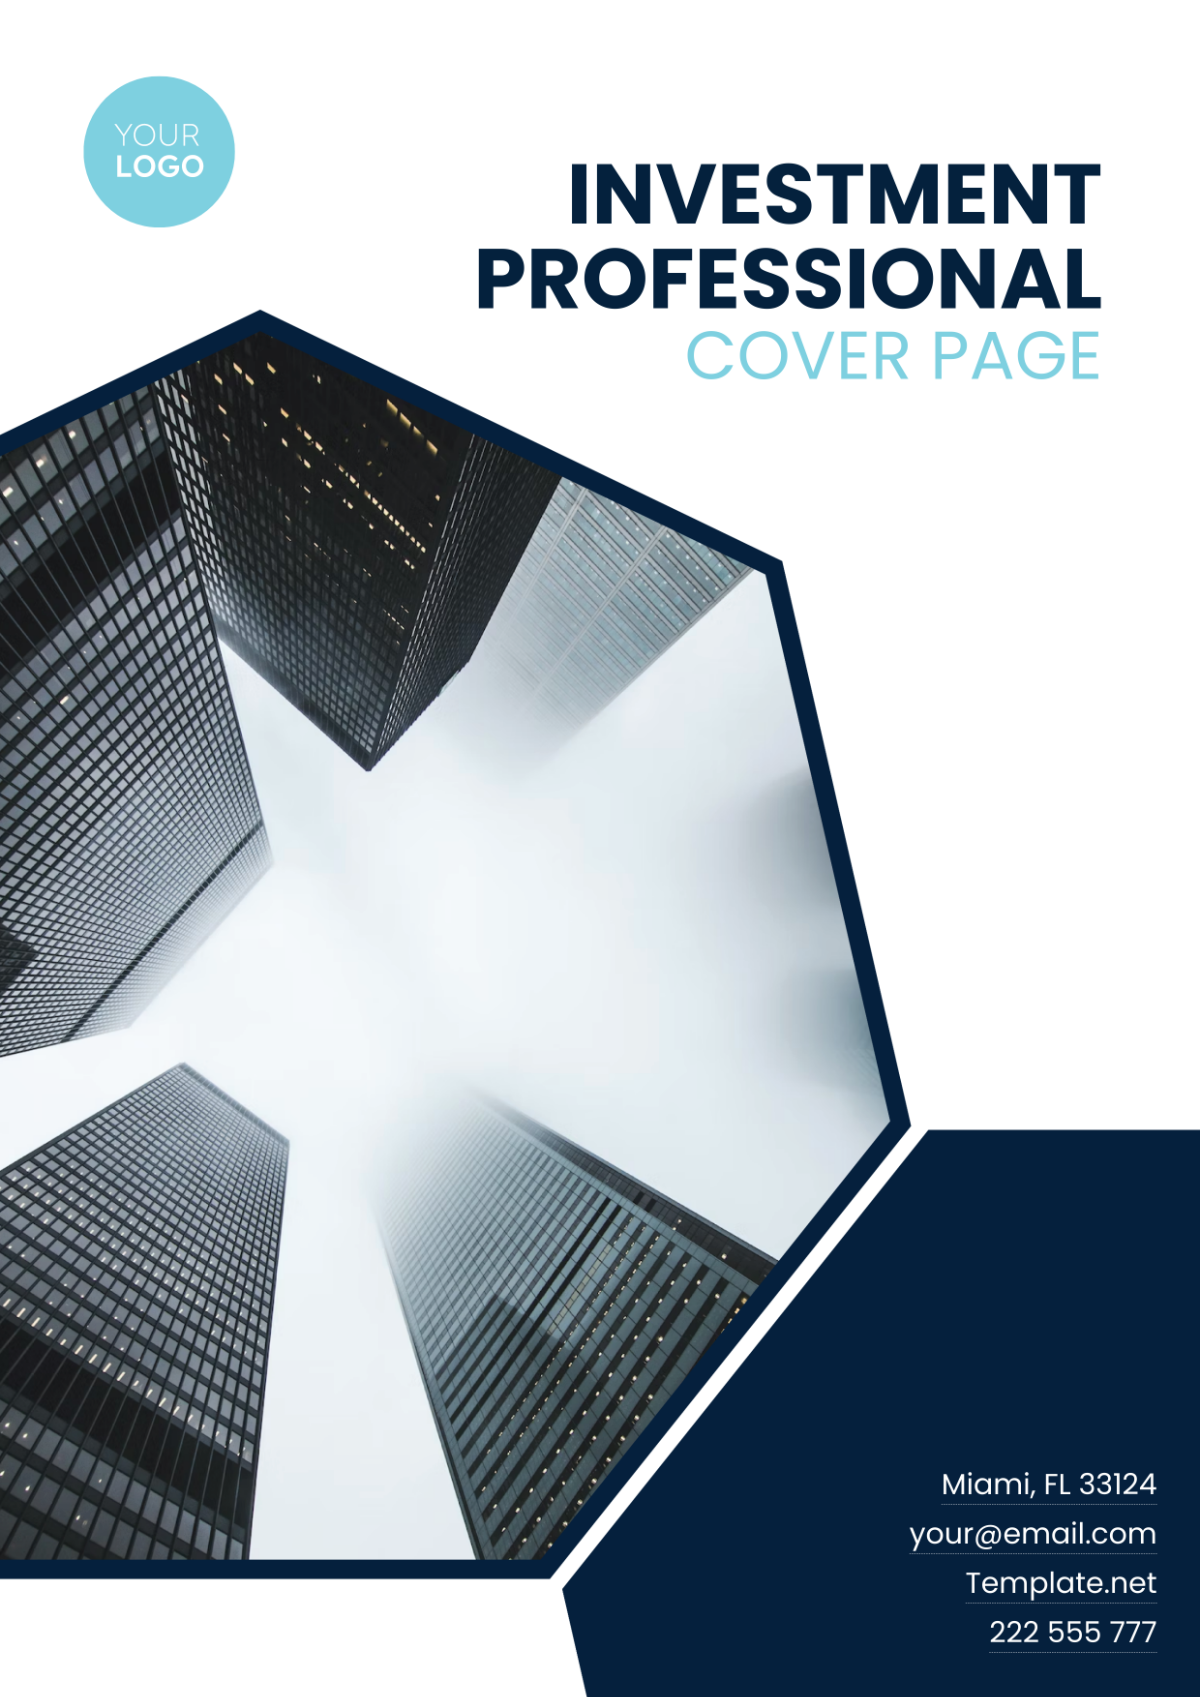 Investment Professional Cover Page